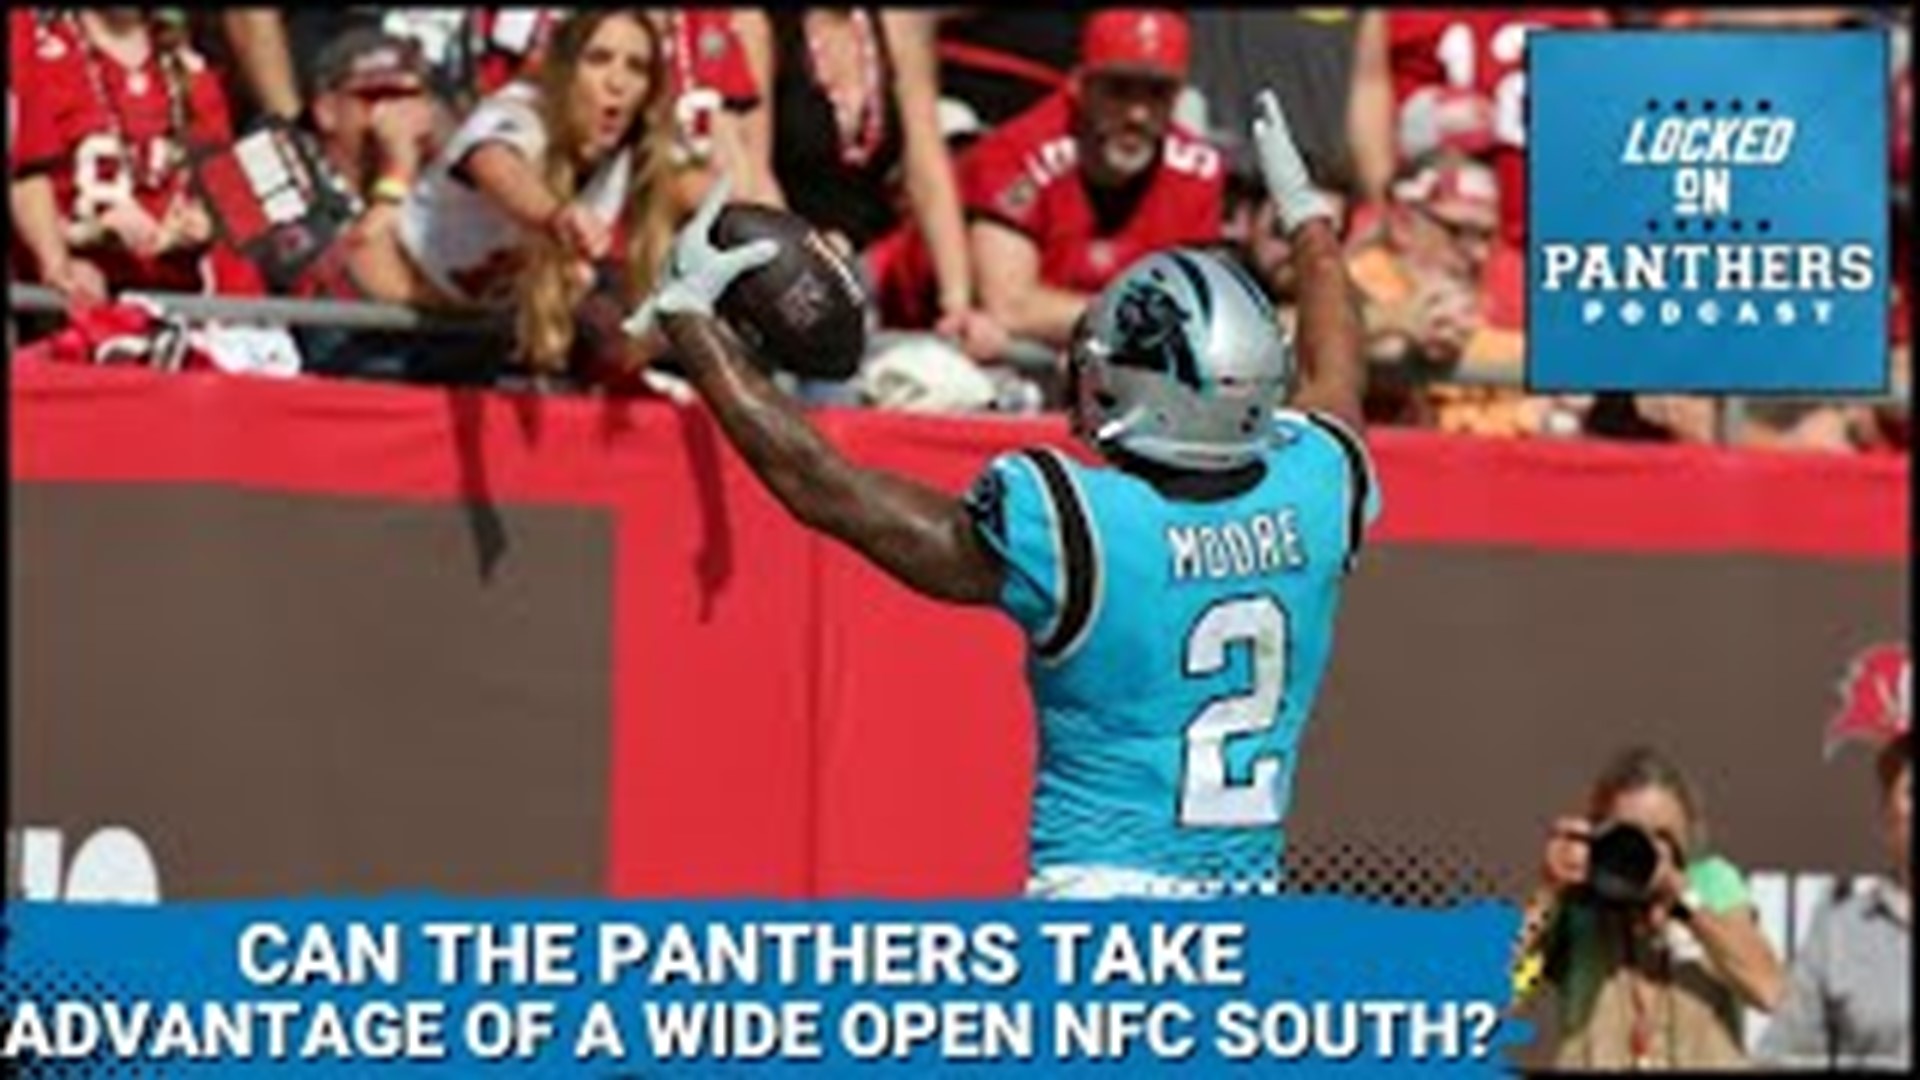 Is now the time for Carolina to be the top dog in the NFC South? That and more on Locked On Panthers